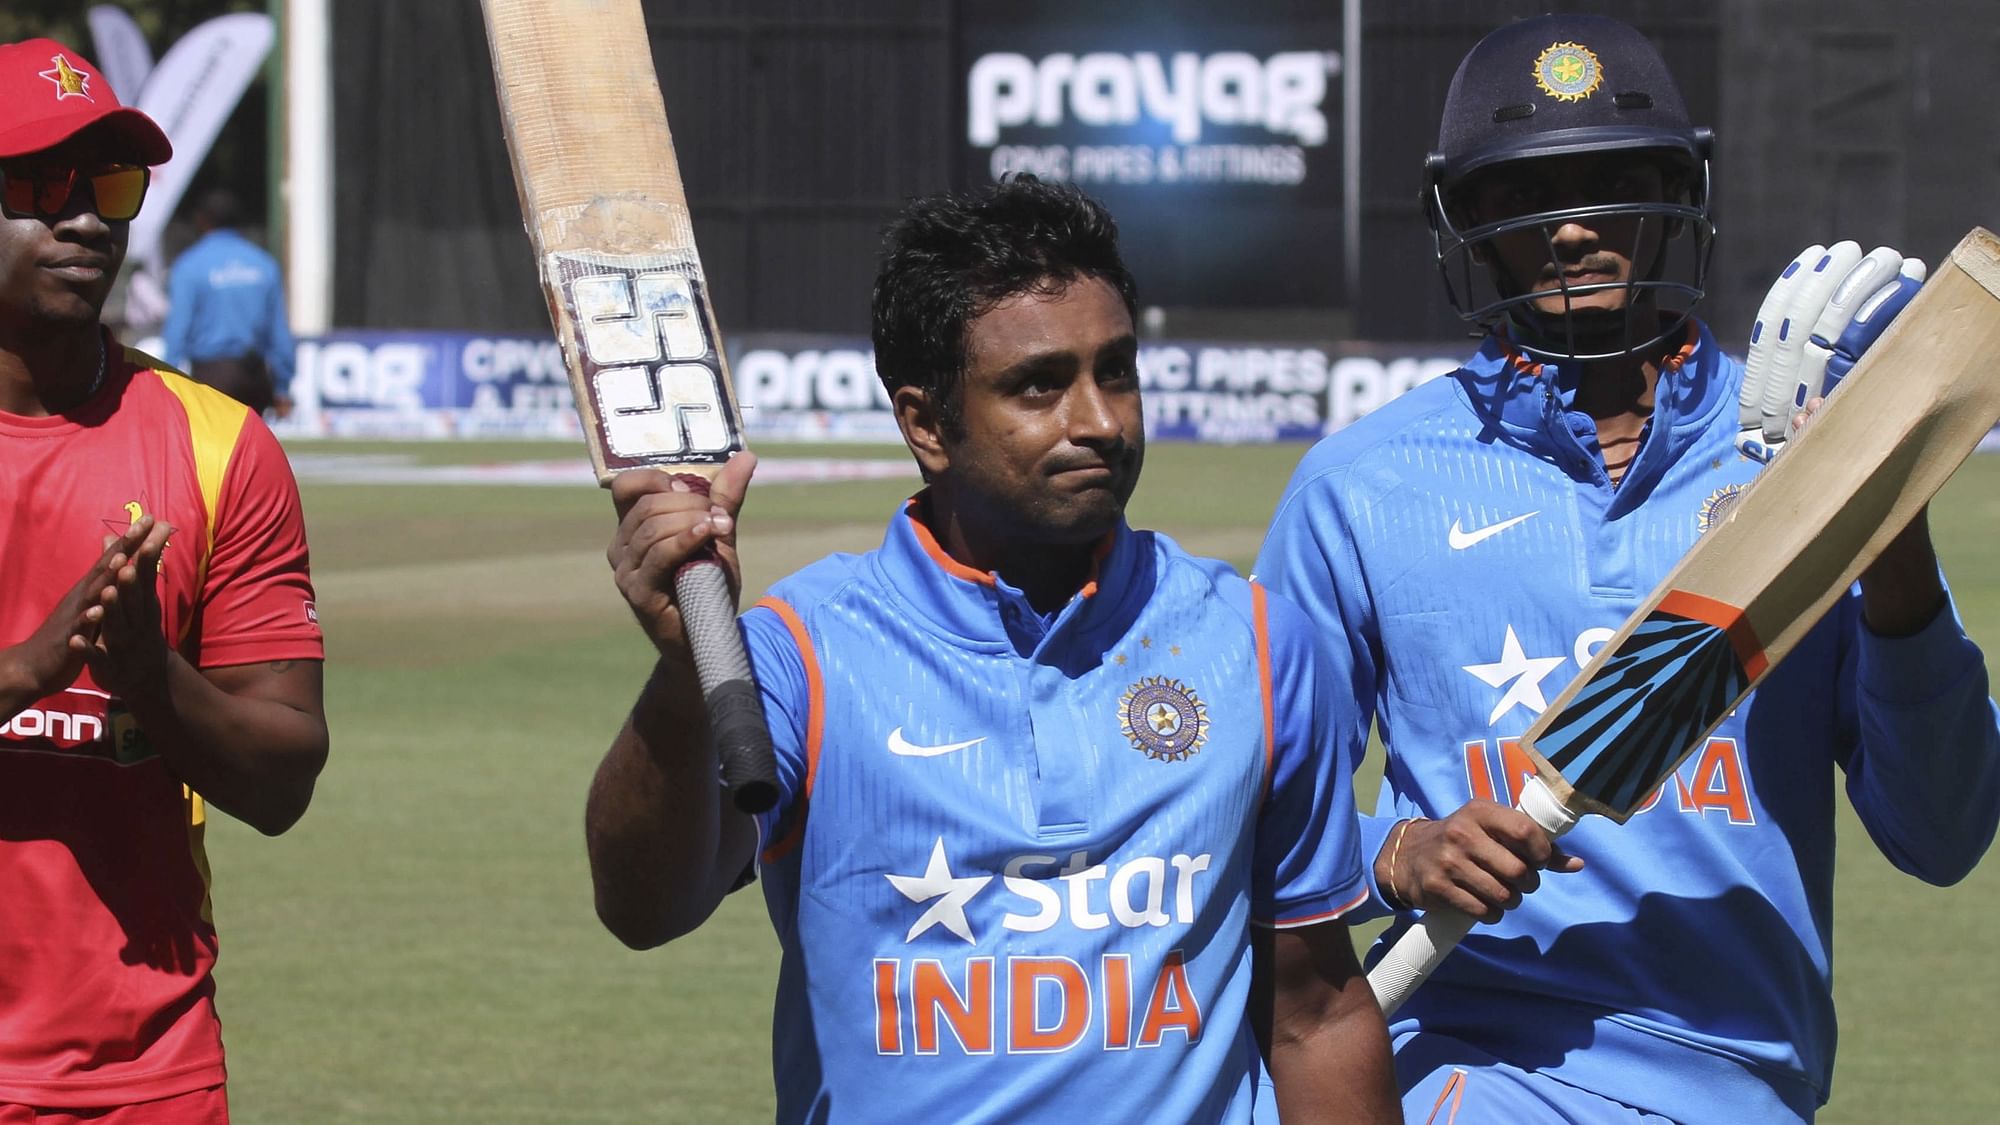 Overlook for selection twice during this World Cup, Ambati Rayudu has announced his international retirement, according to Indian Express.